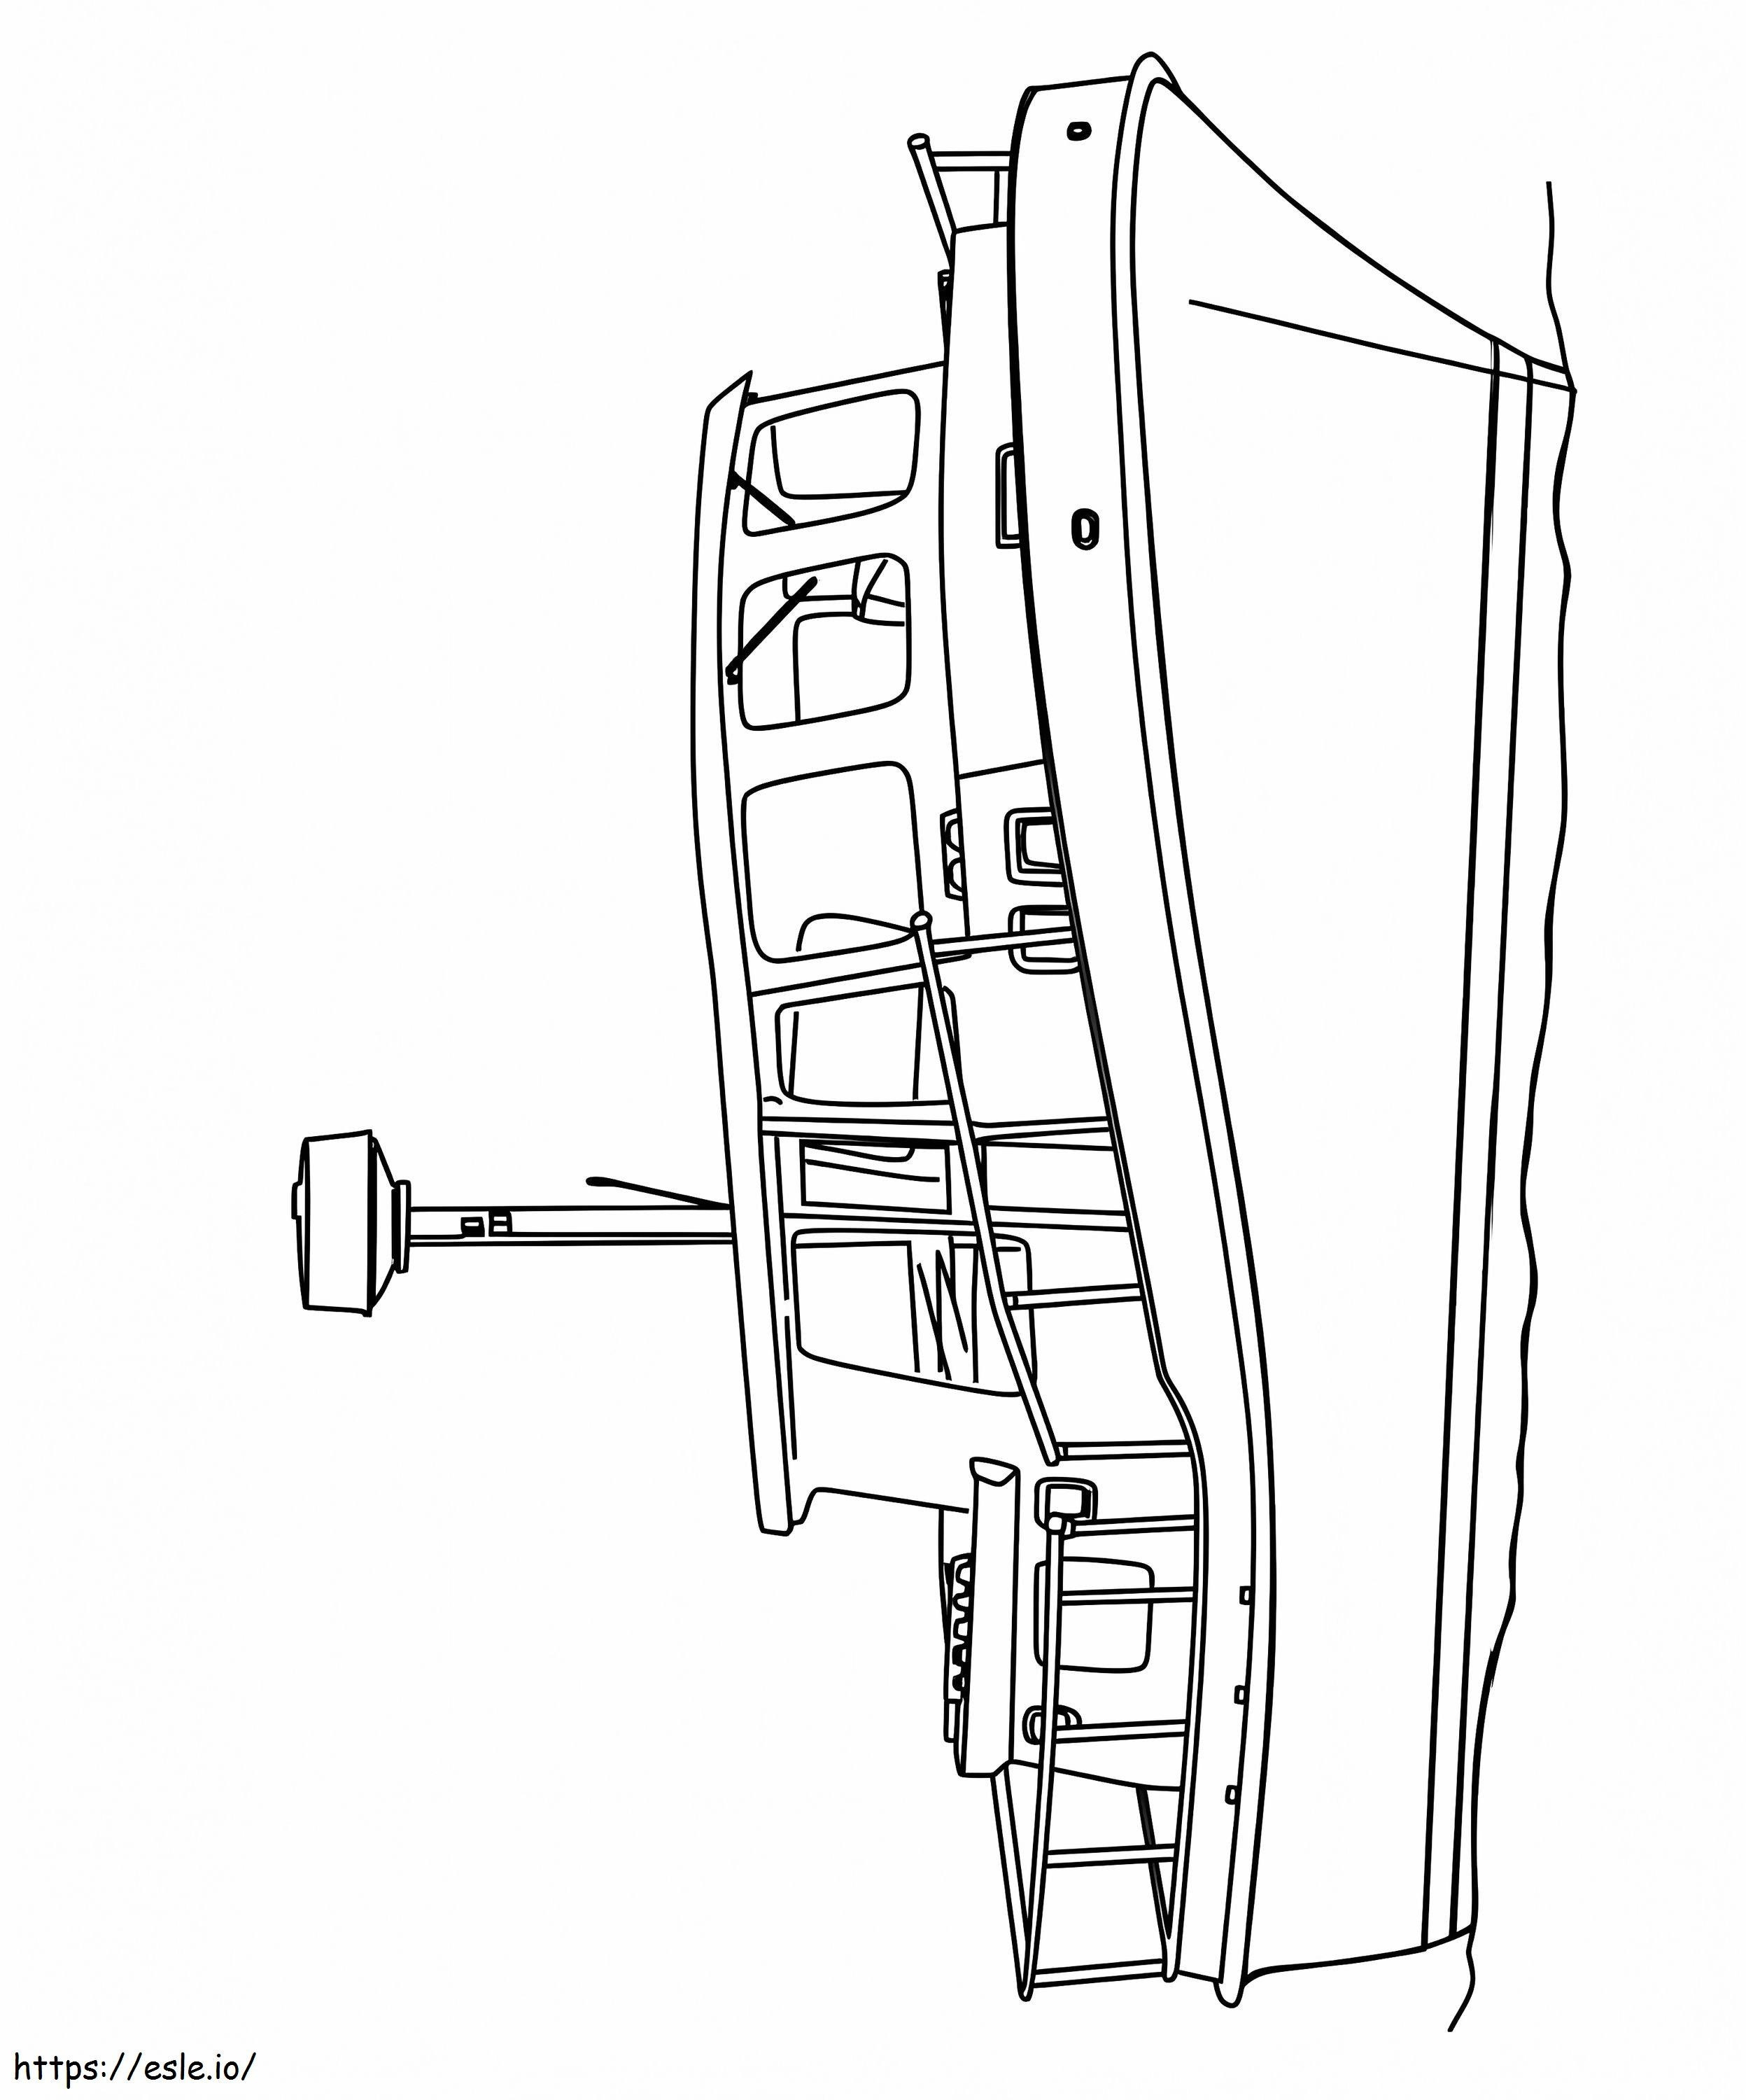 A Trawler coloring page